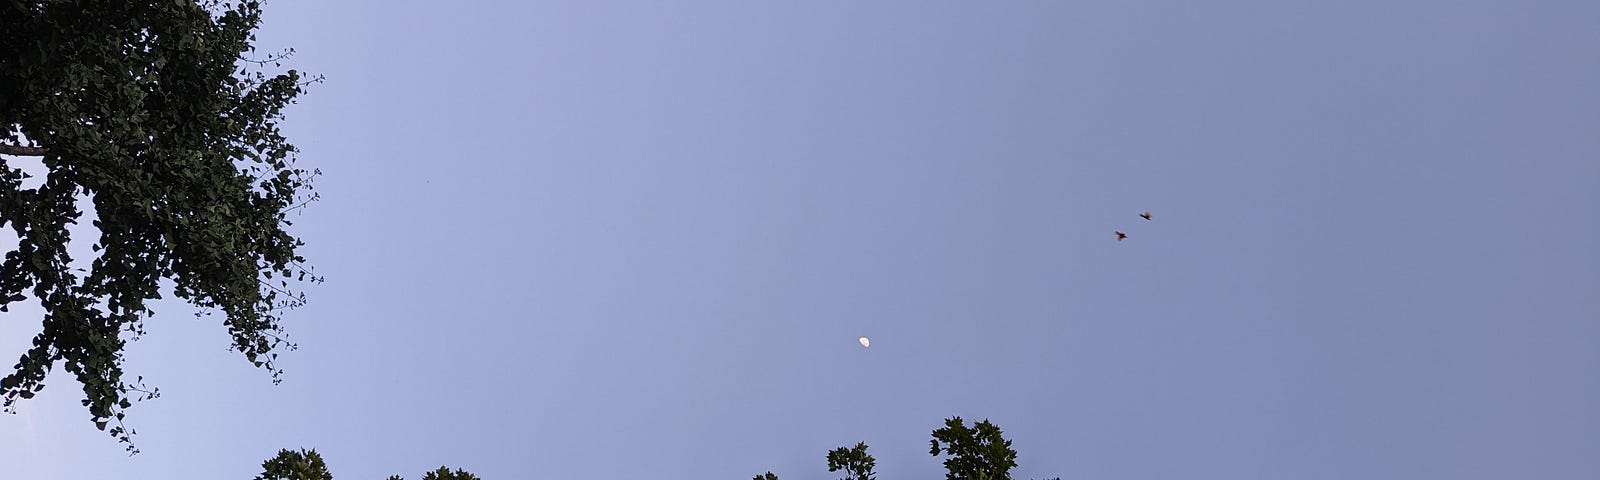 photo of last quarter moon, trees, and two birds in flight